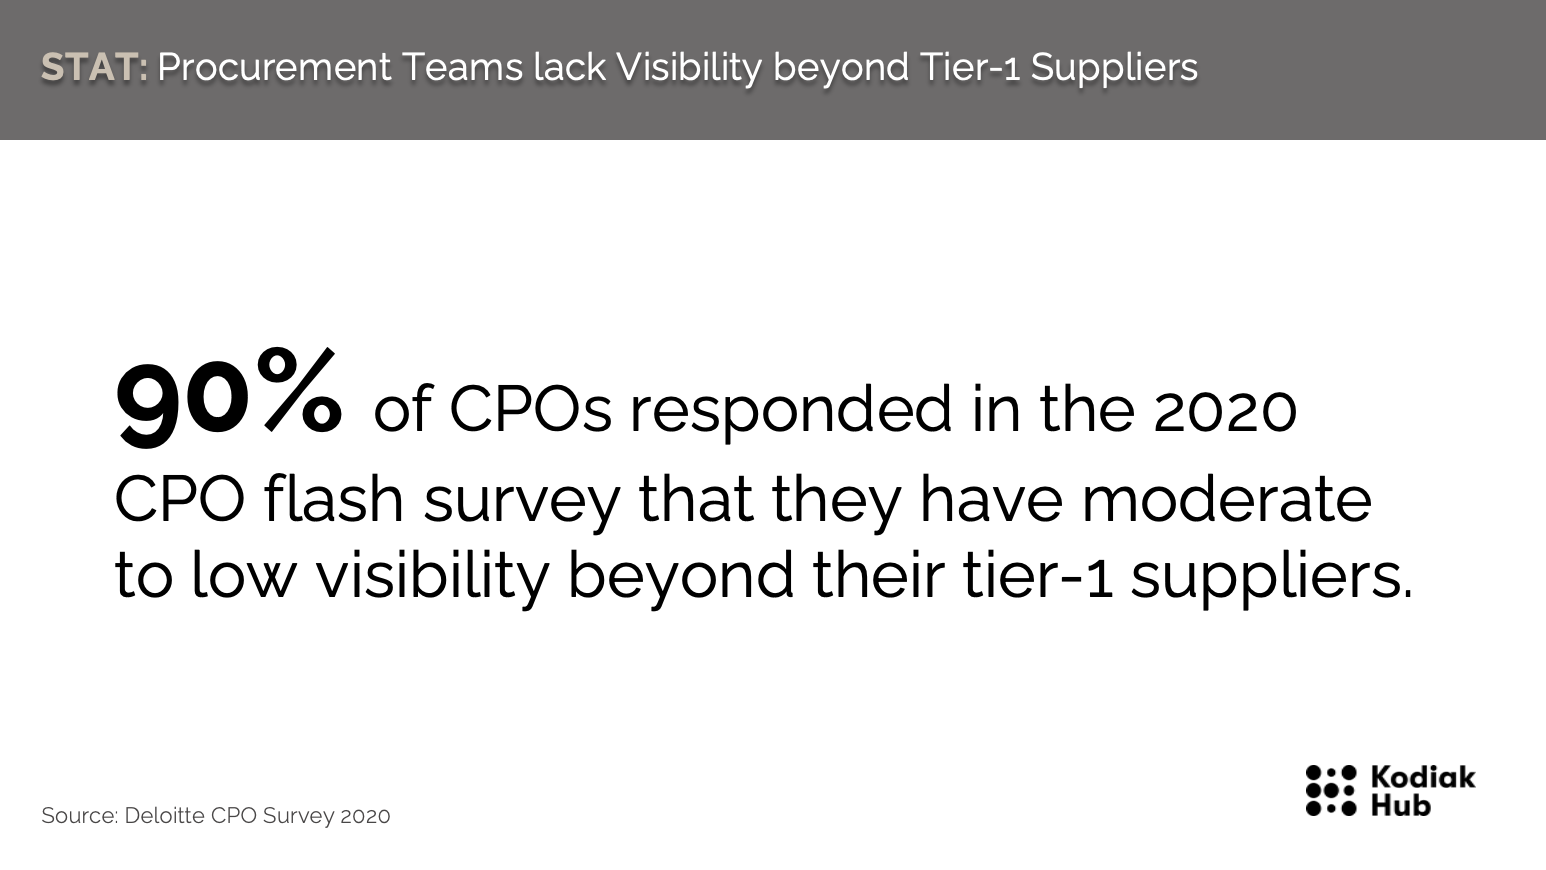 Lack of visibility beyond tier 1 suppliers